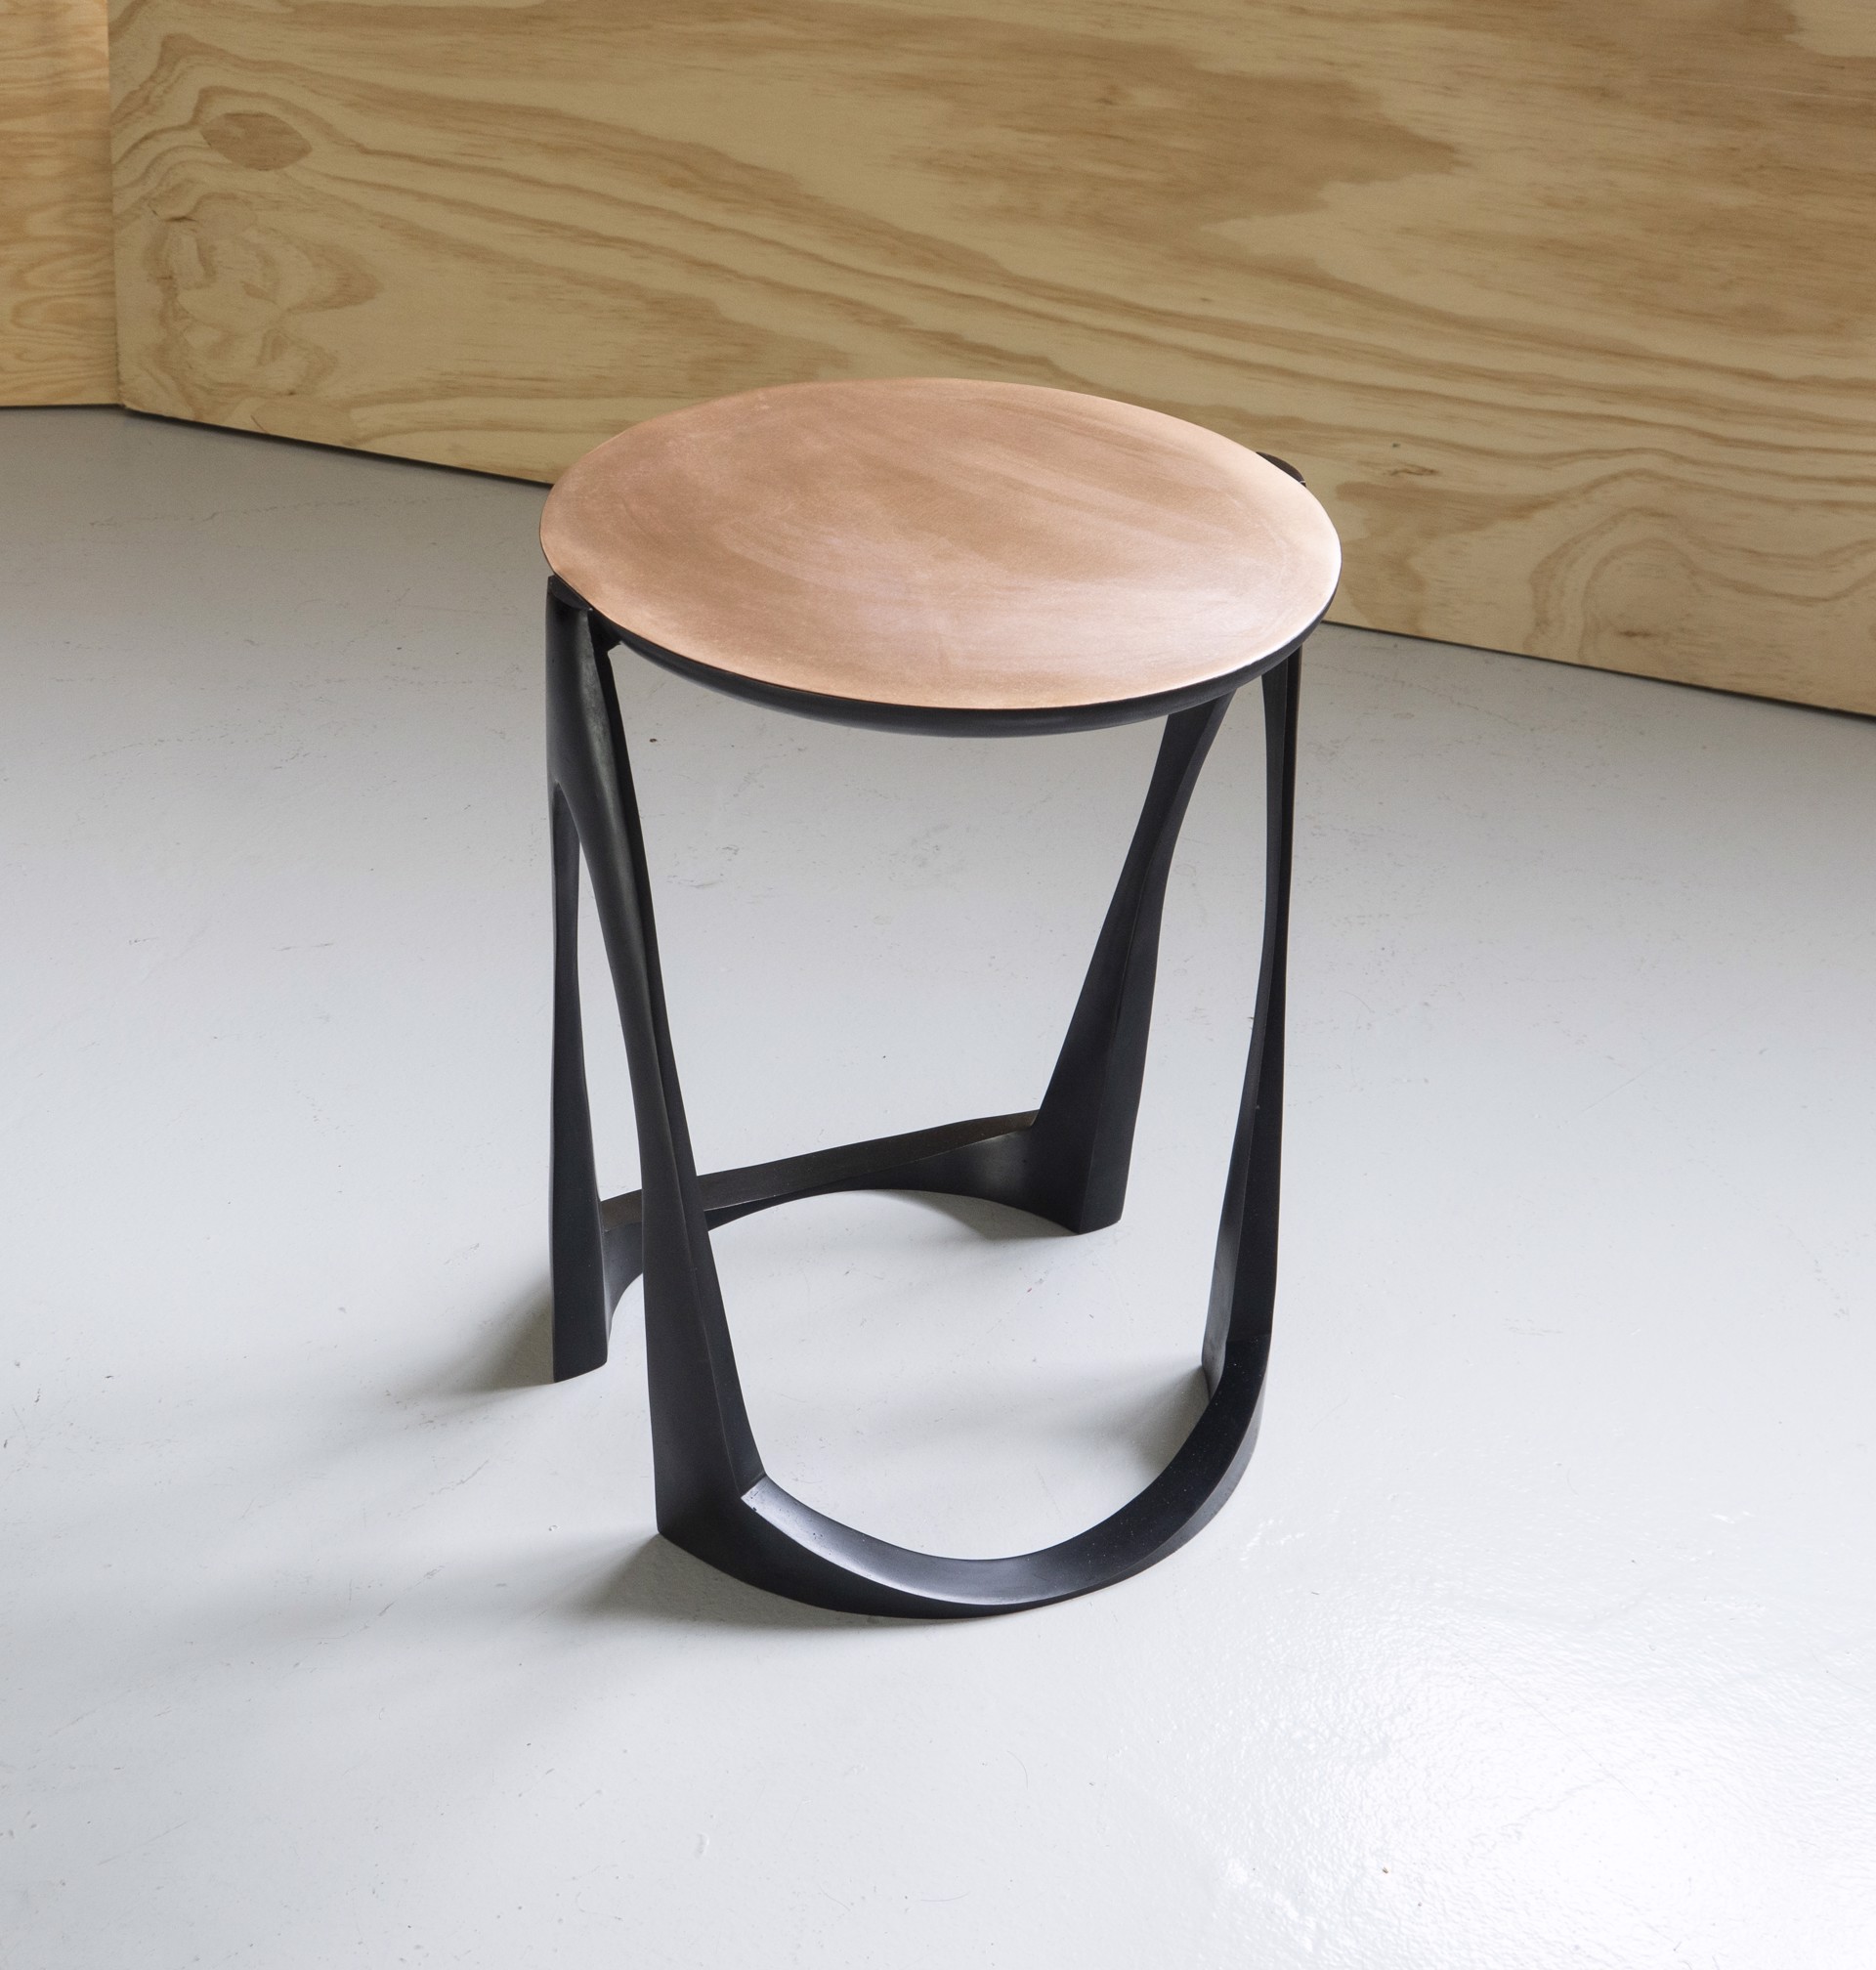 Side table in bronze by Anasthasia Millot